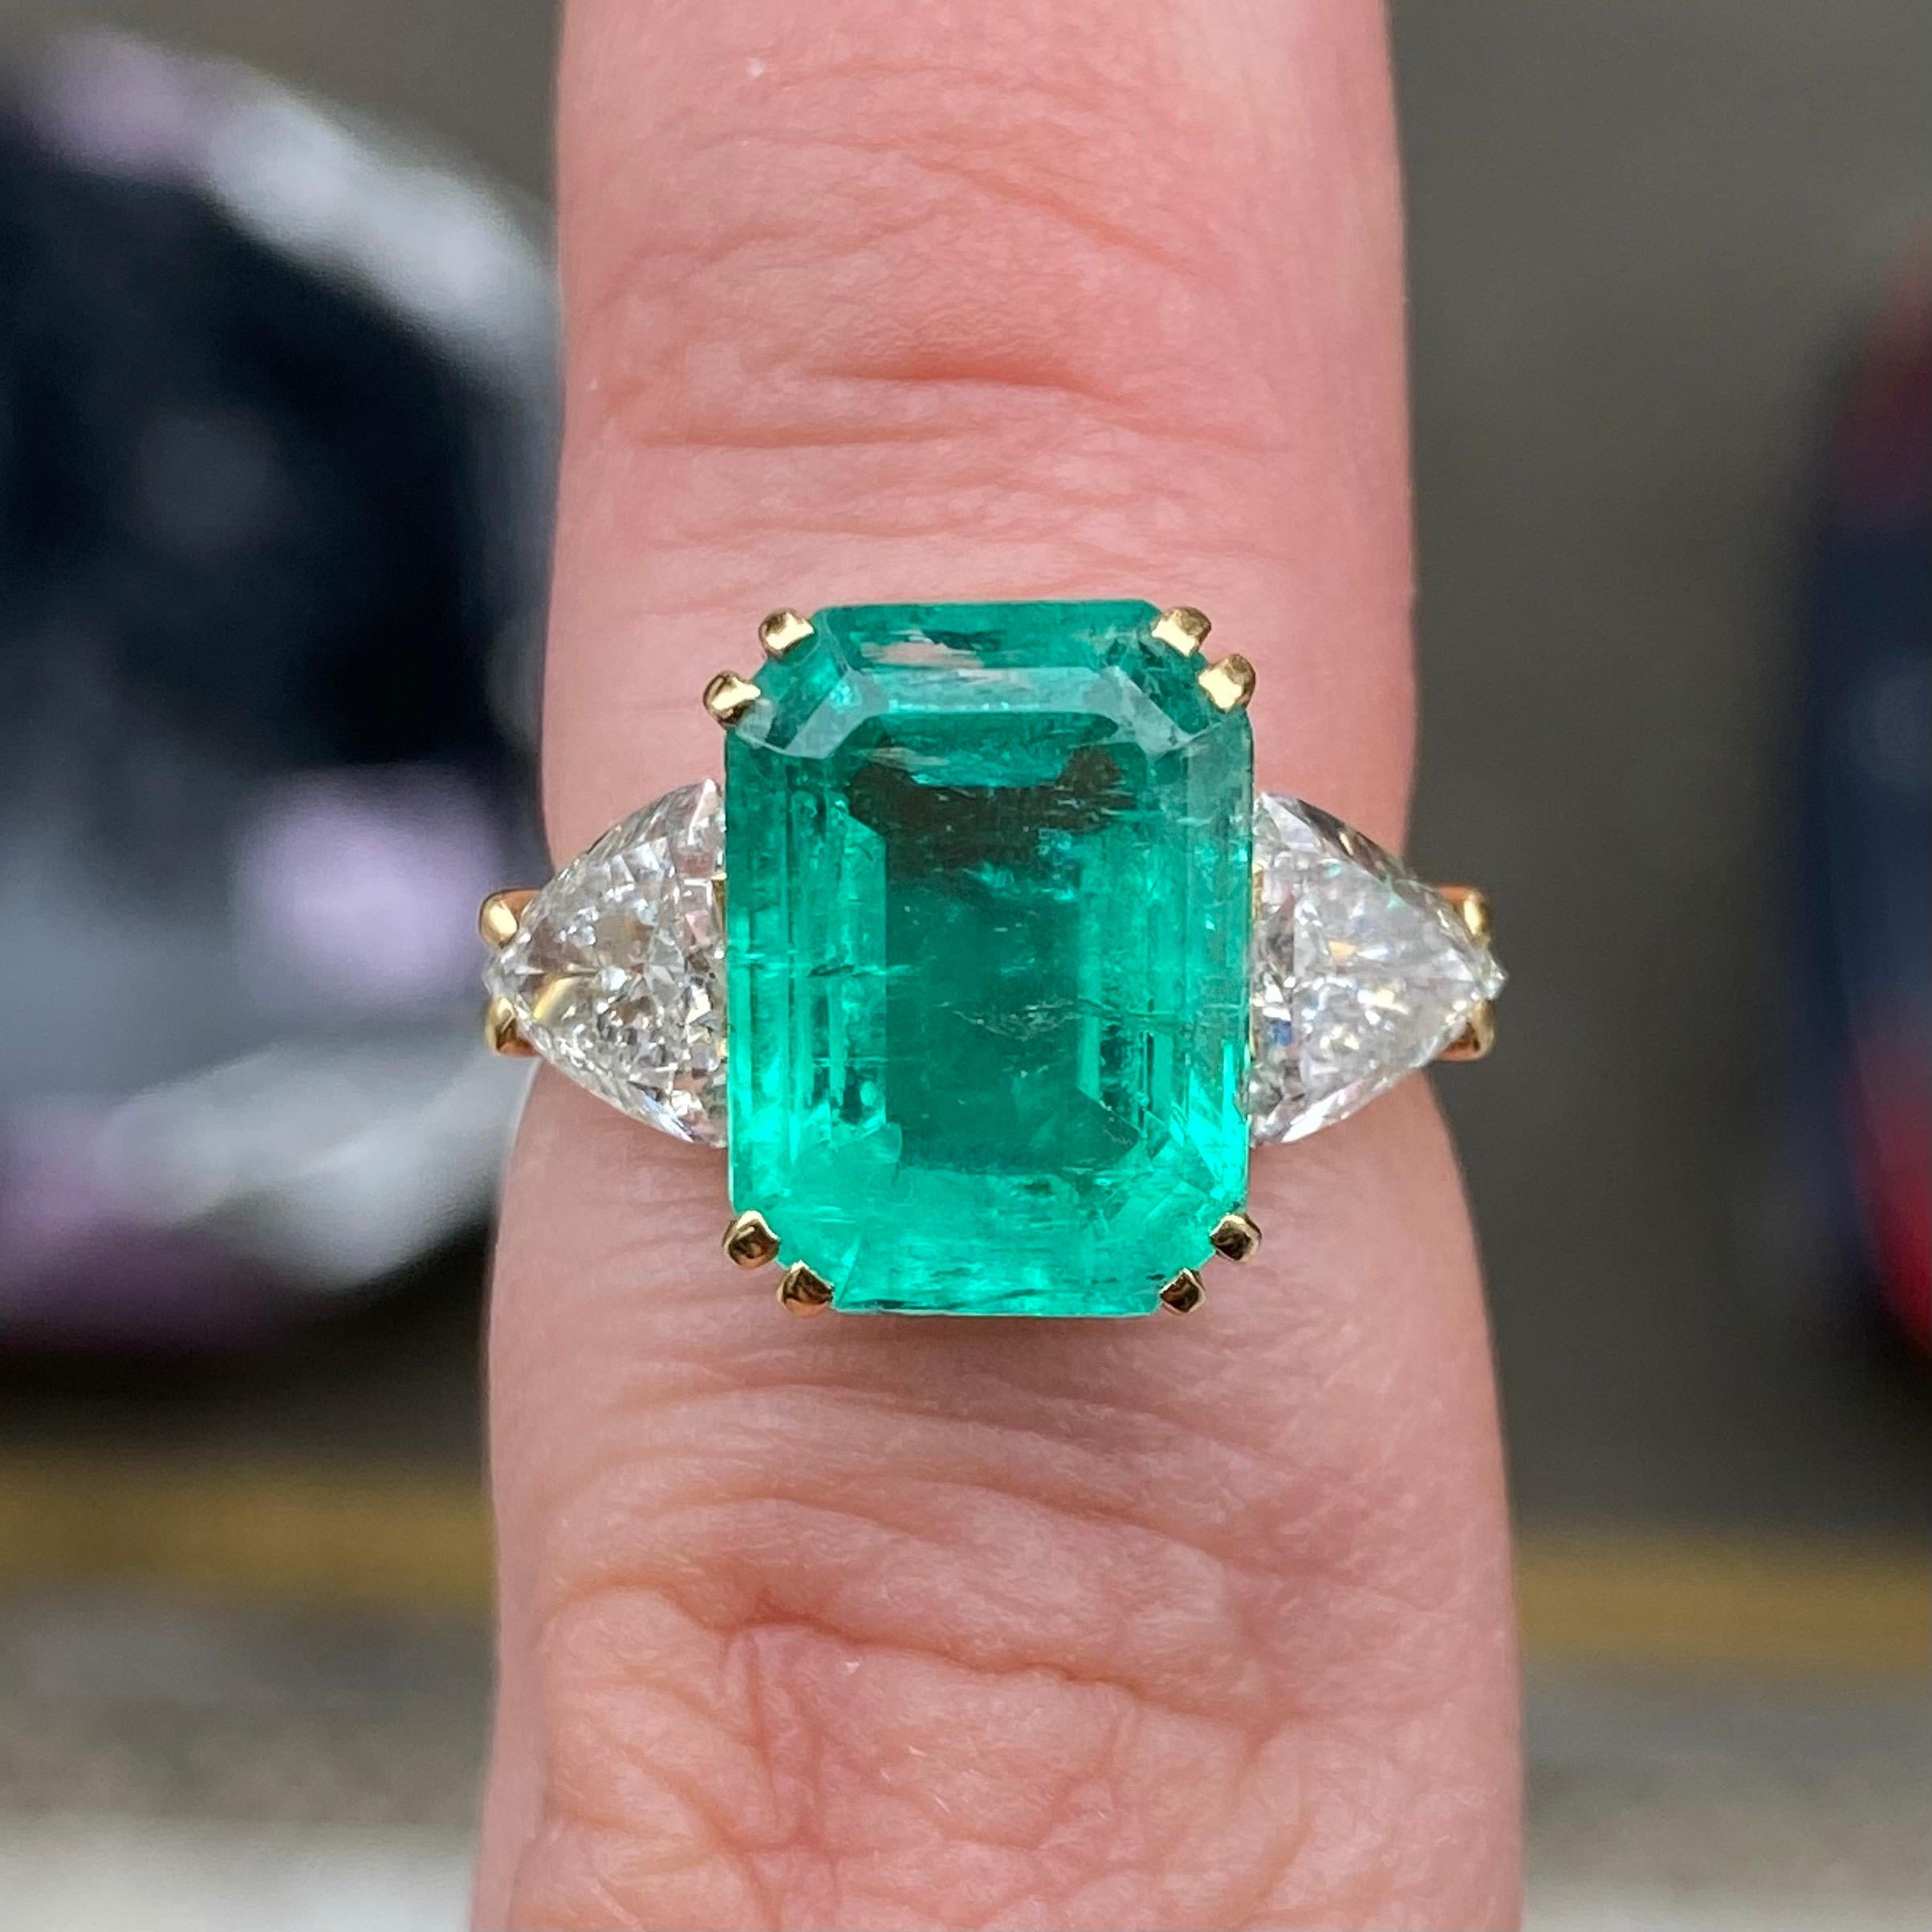 Vintage certified 4.50-carat emerald and 1.40-carat trilliant-cut diamond three-stone engagement ring in 19.2 karat yellow gold, European, 1990s. This ring features a vibrant emerald-cut emerald (probably Colombian) double claw-set to the center,